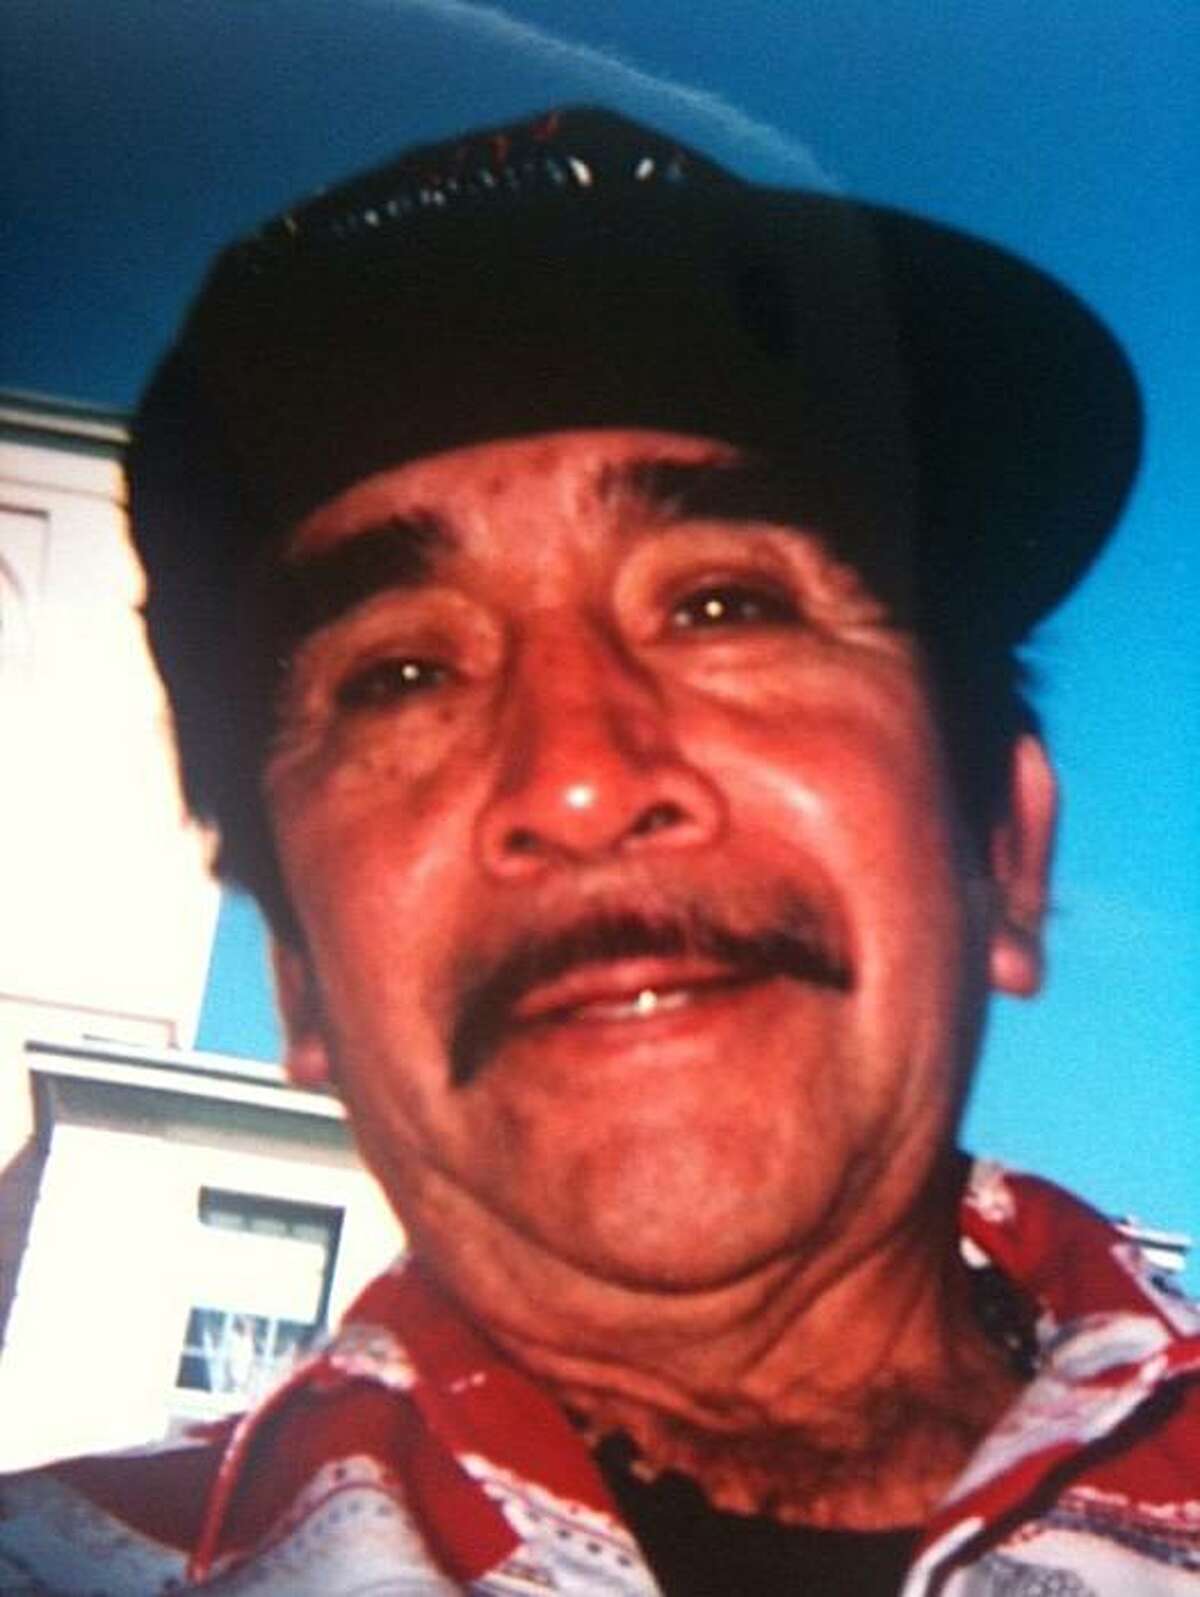 Pedro Hernandez, 68 years old, is a suspect and wanted for questioning on performing sex acts on studnets at the Sanchez Elementary Scool, Thursday June 3, 2010, in San Francisco, Calif.